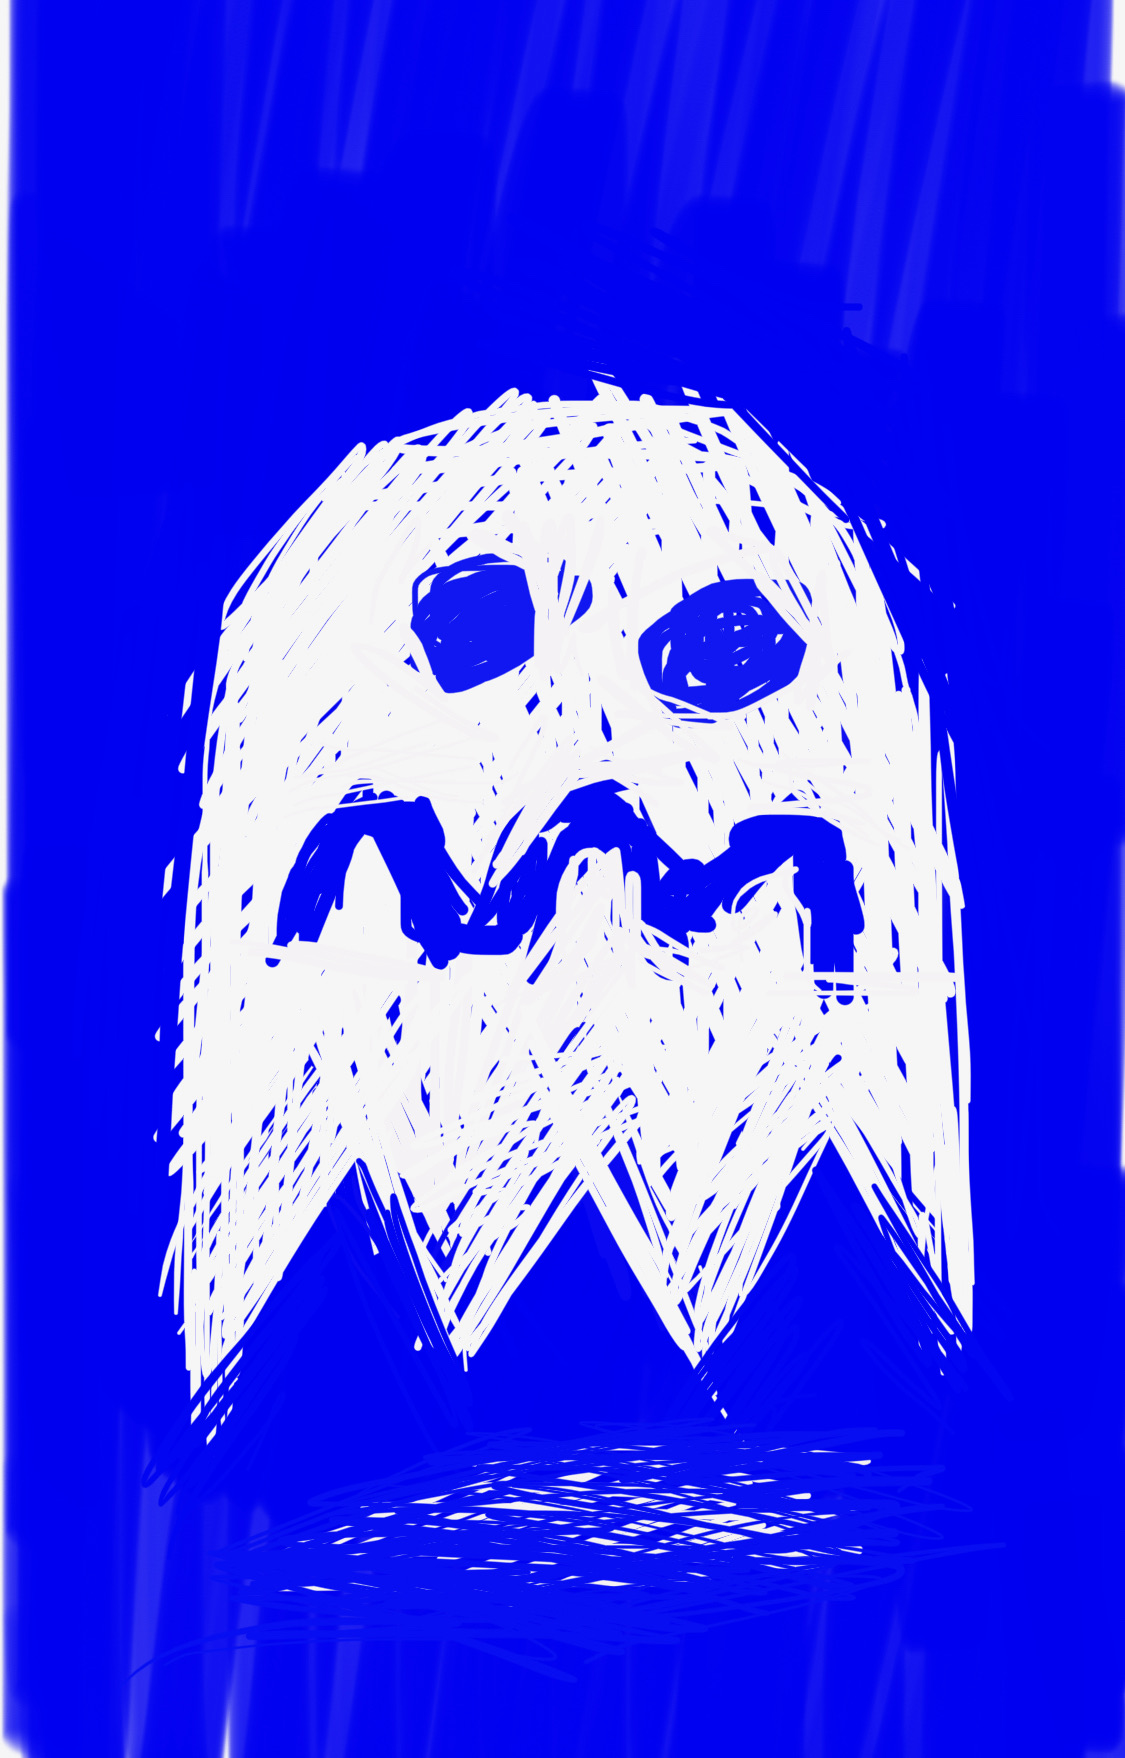 A frowning Pac-Man ghost, white on a blue background the way it was in the game